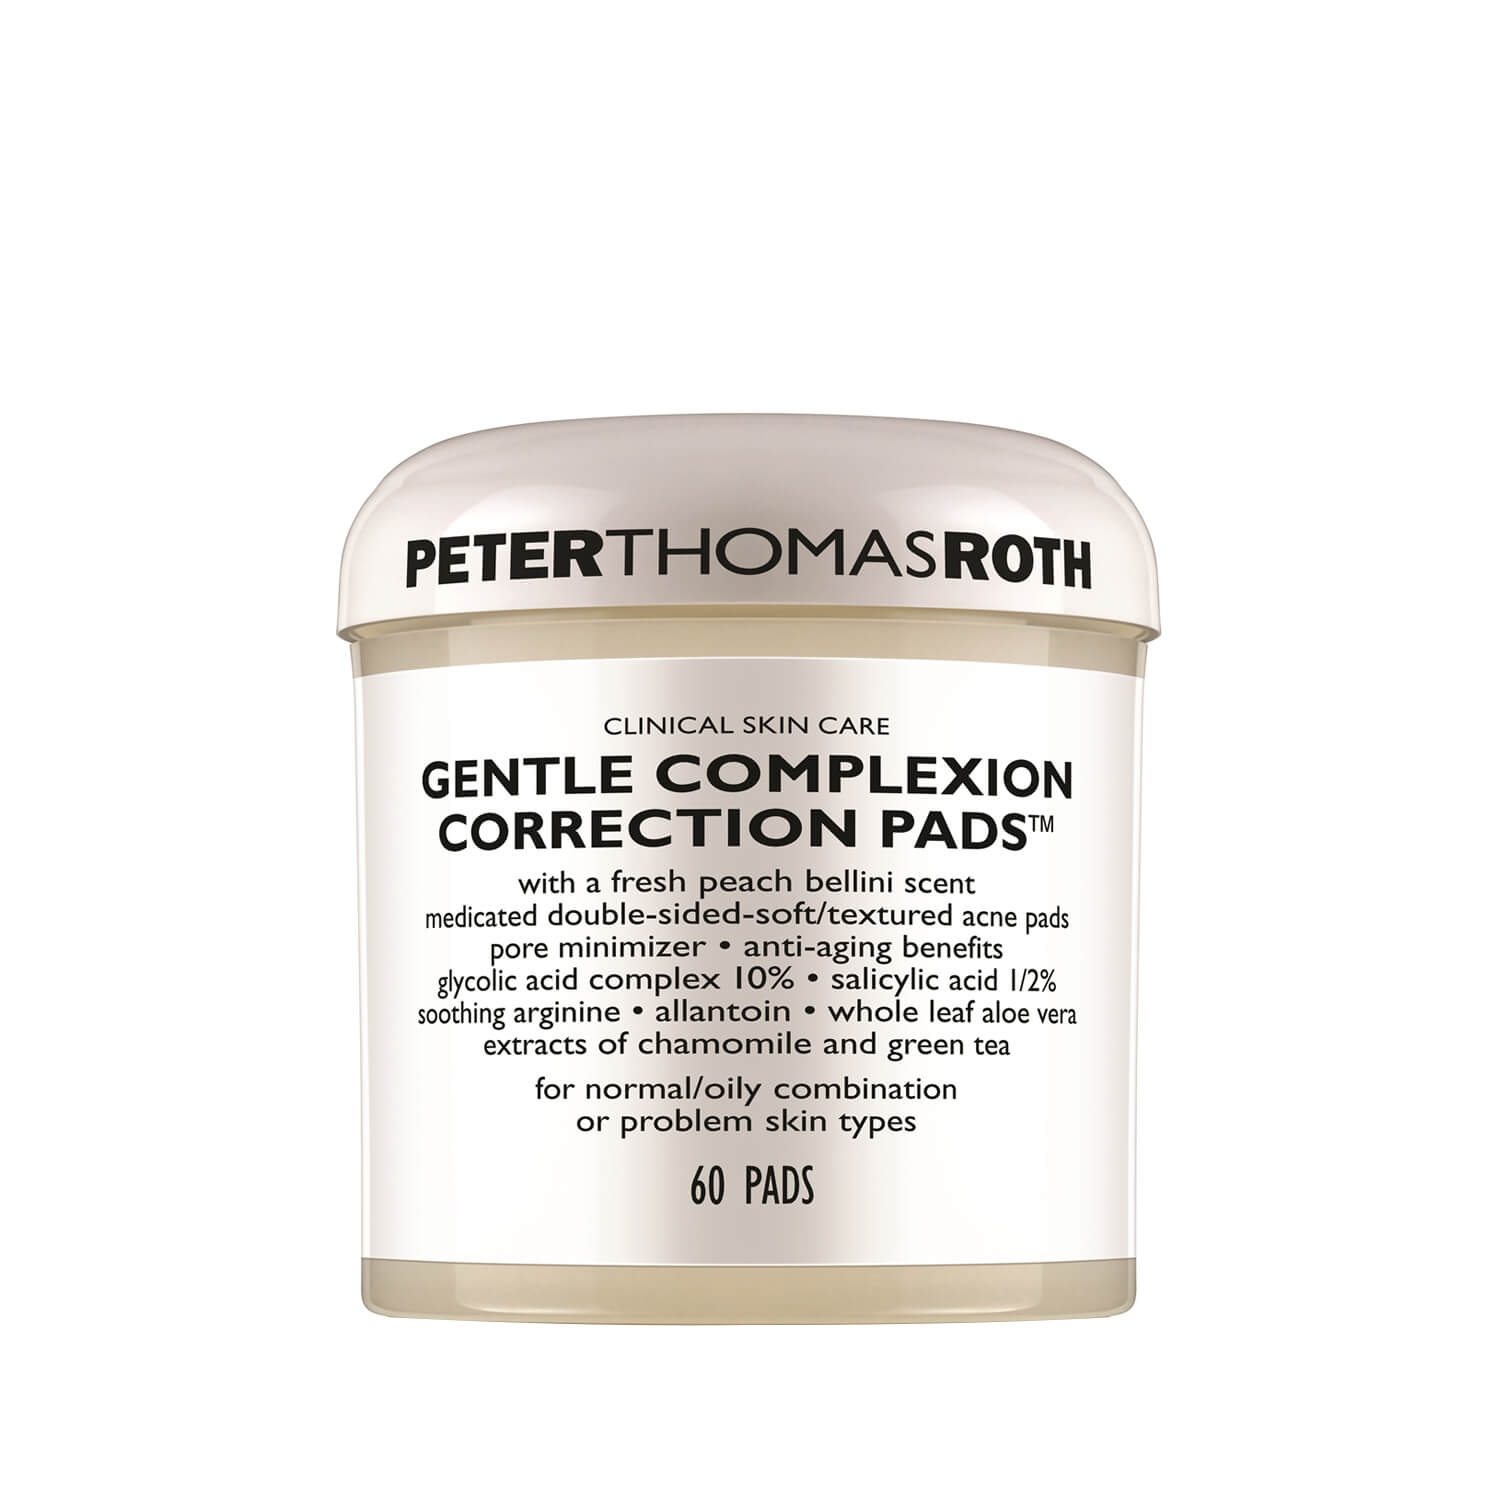 Peter Thomas Roth Gentle Complexion Correction Pads (60 Pads)